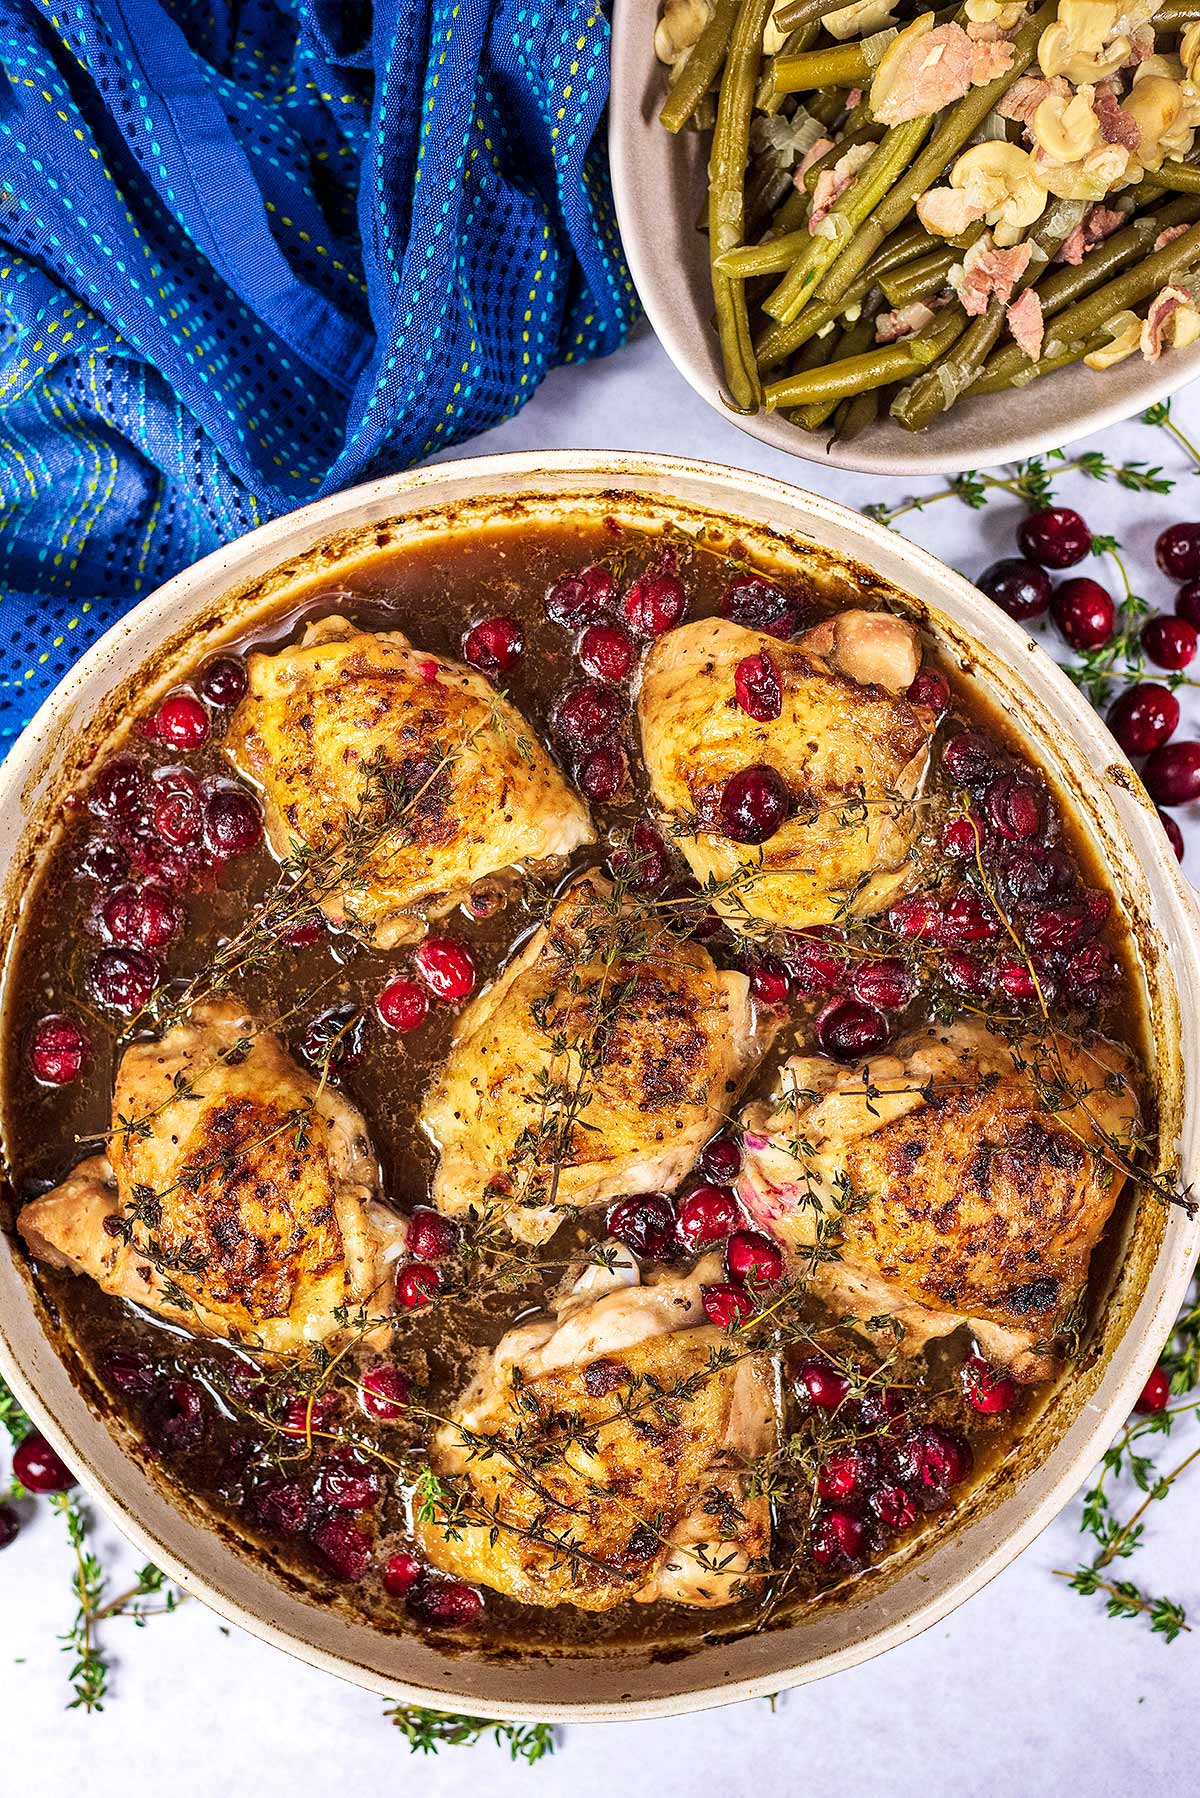 A large round dish containing cooked chicken thighs in a cranberry gravy.